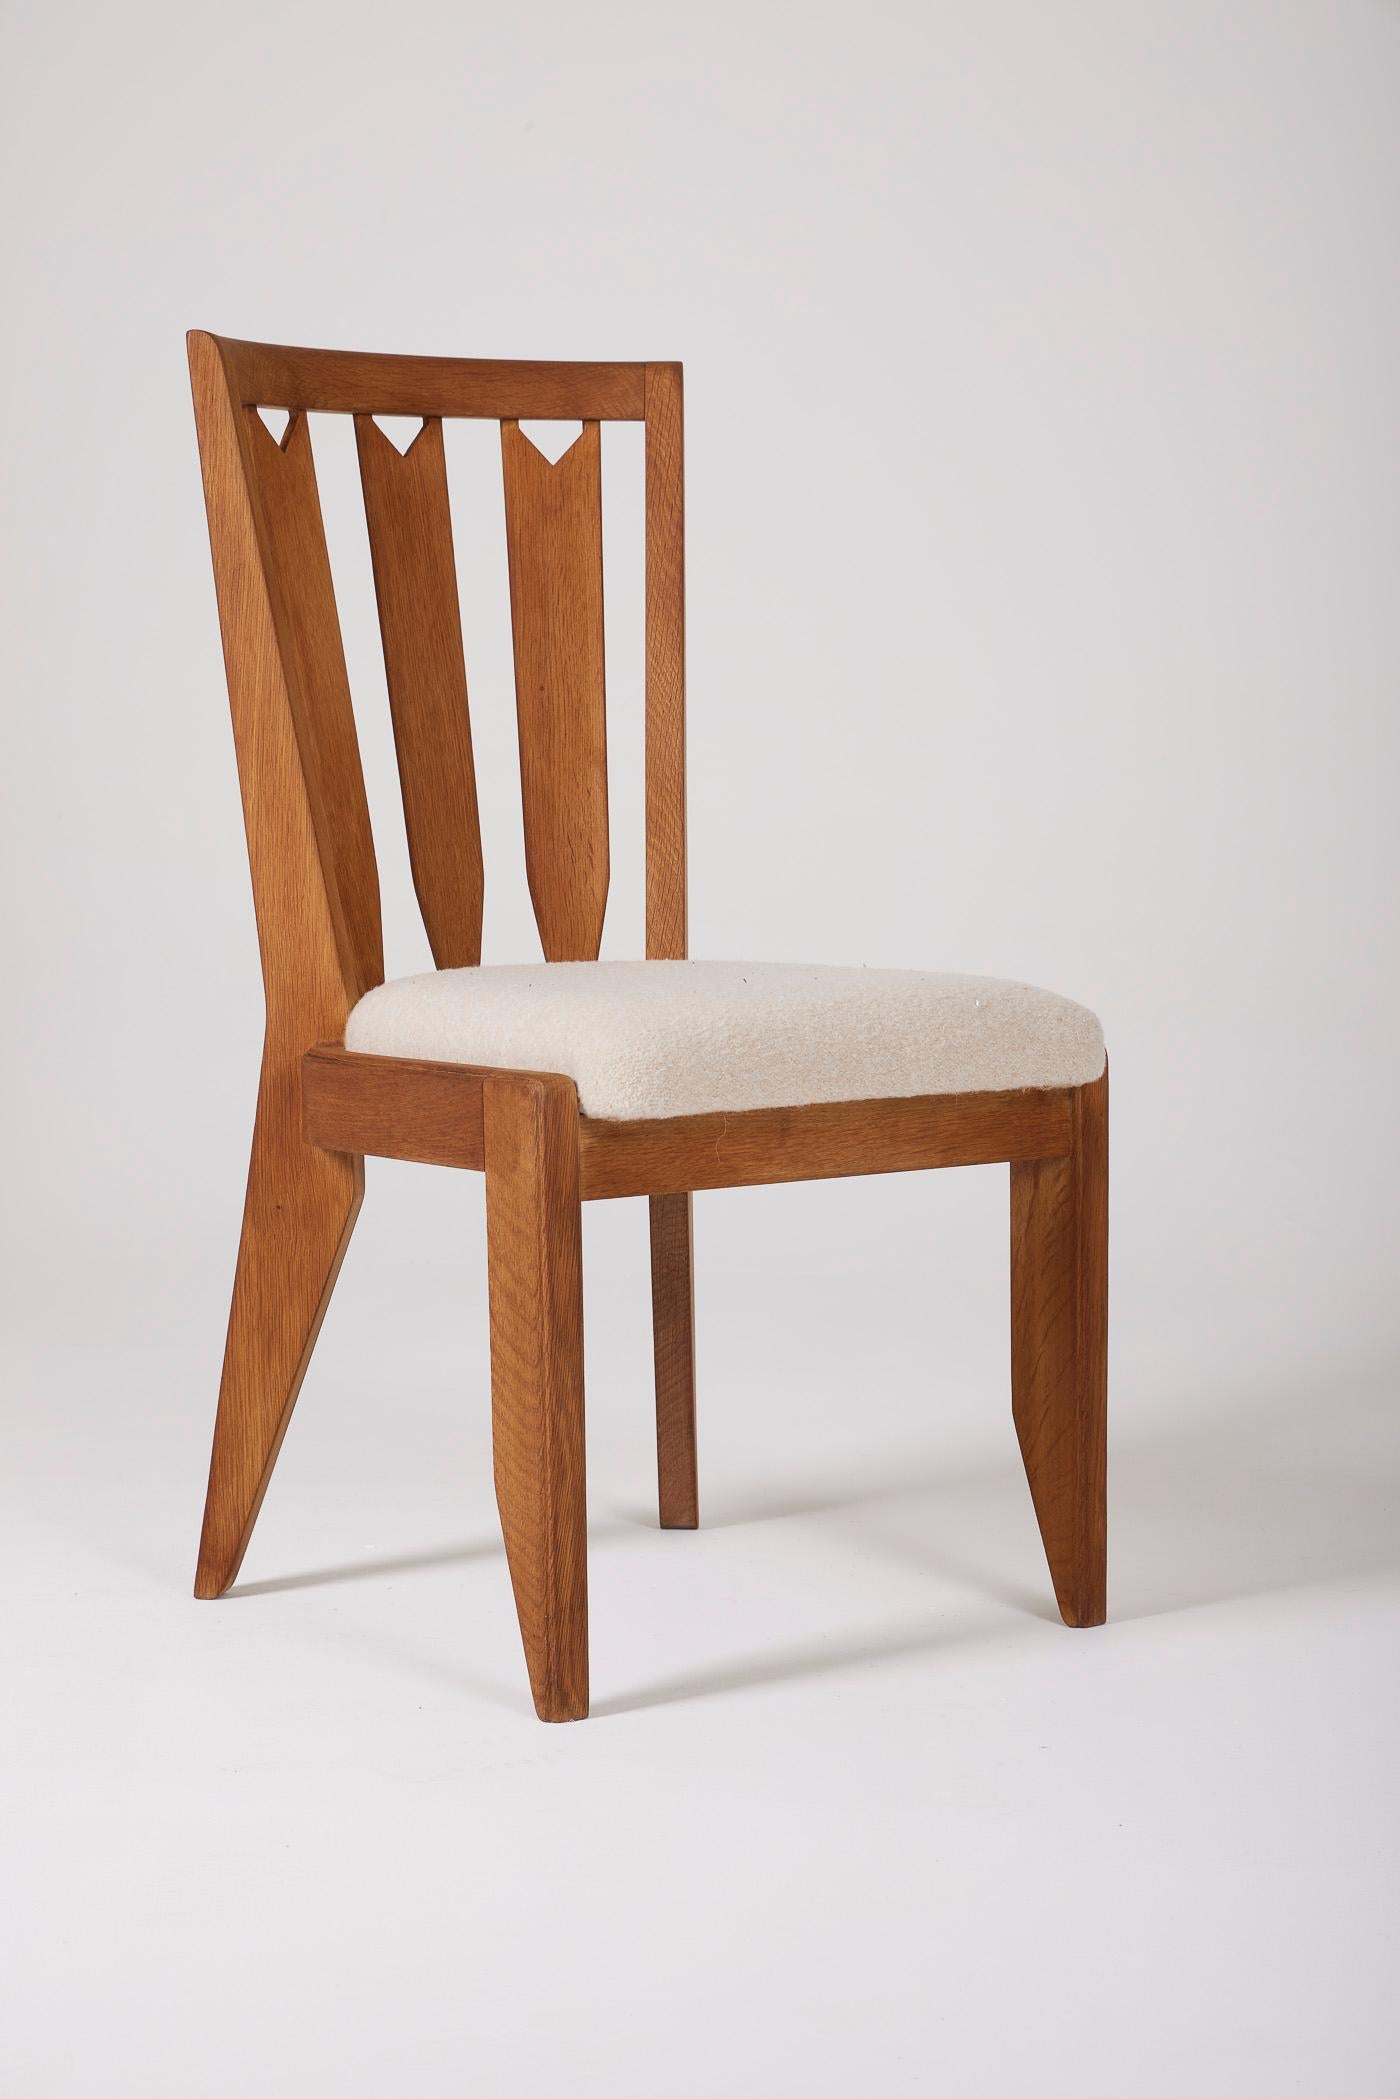 Guillerme & Chambron chair For Sale 1